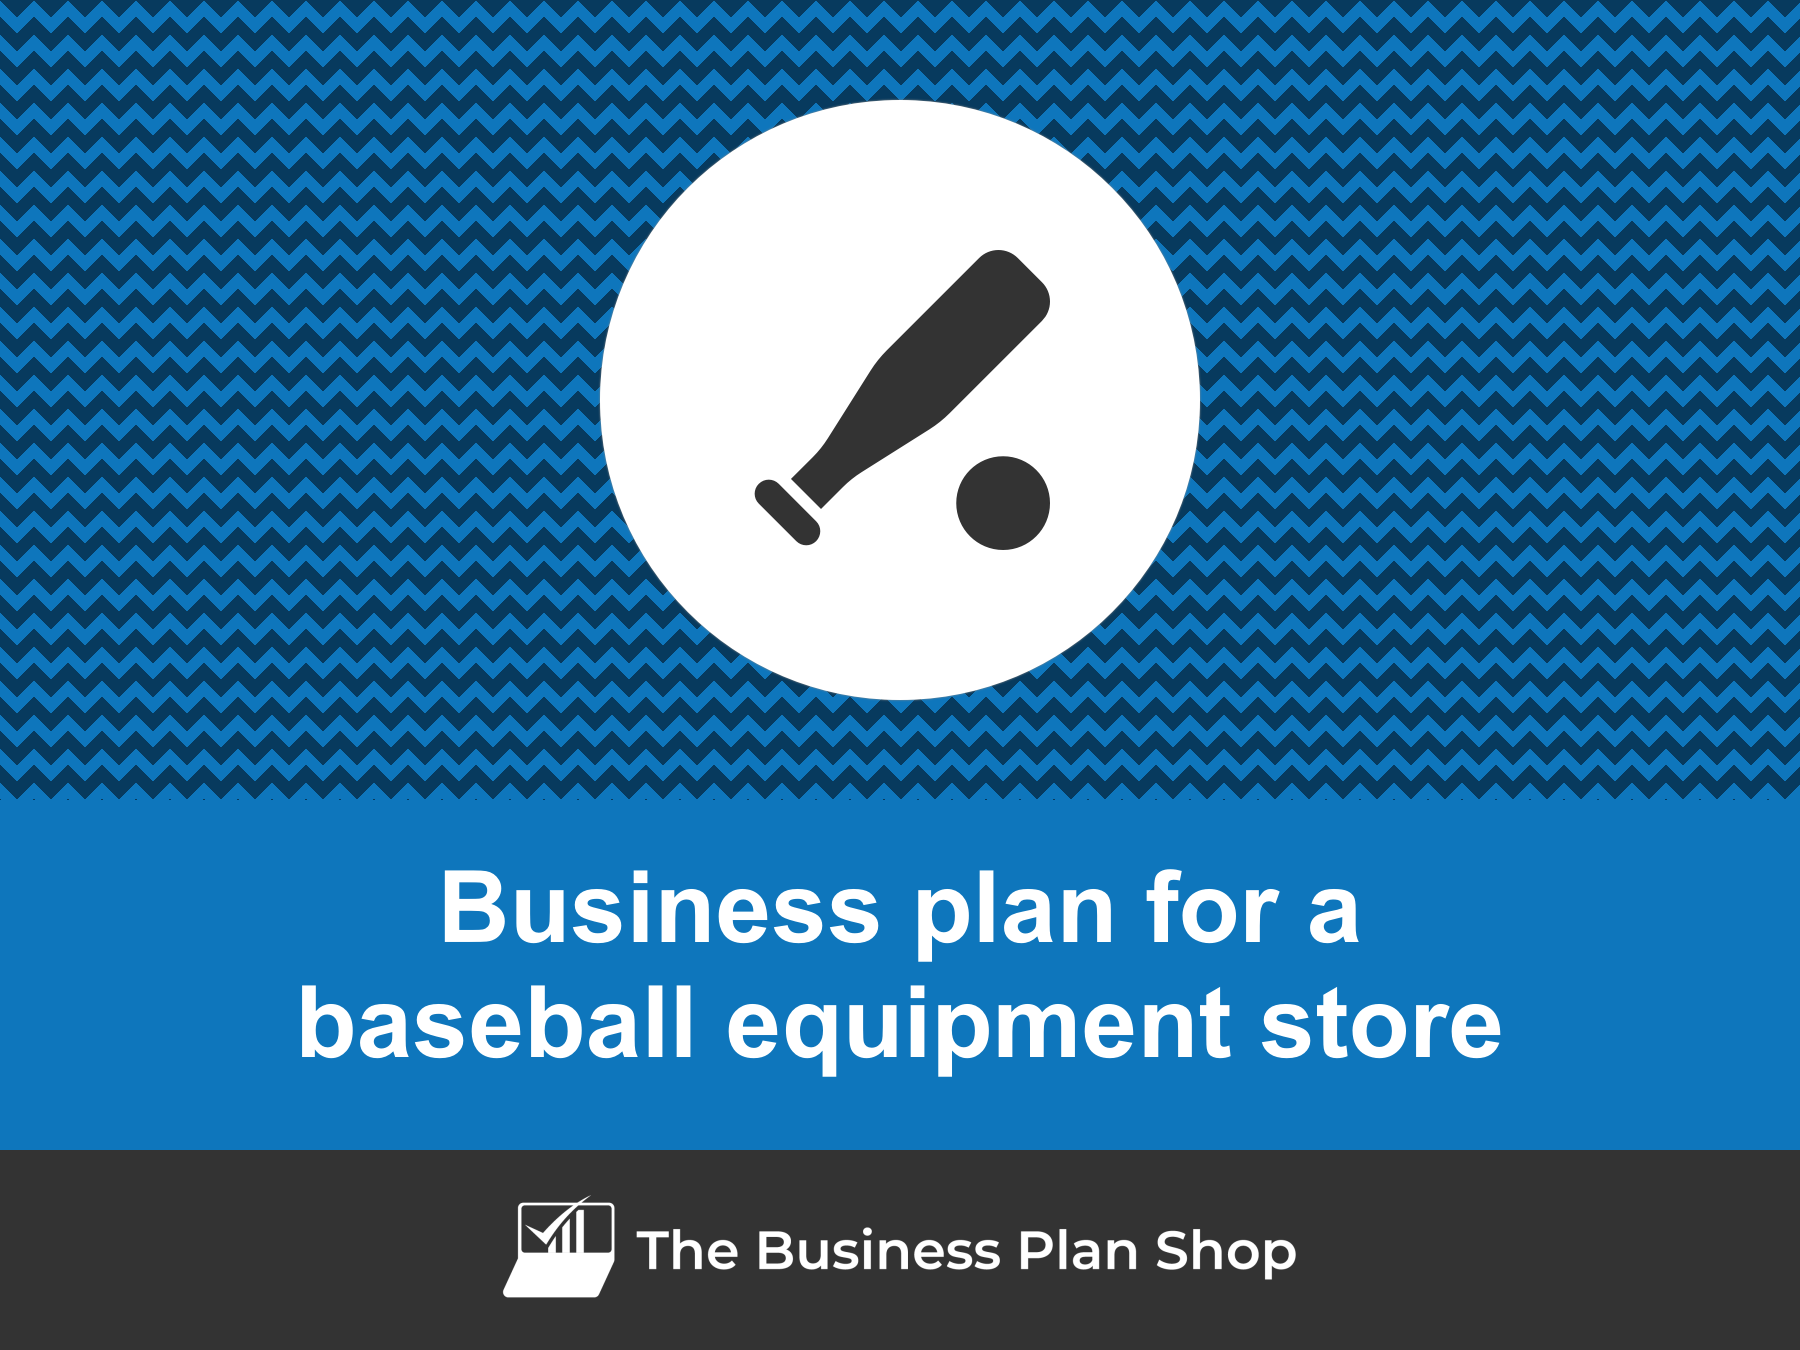 How to write a business plan for a baseball equipment store?